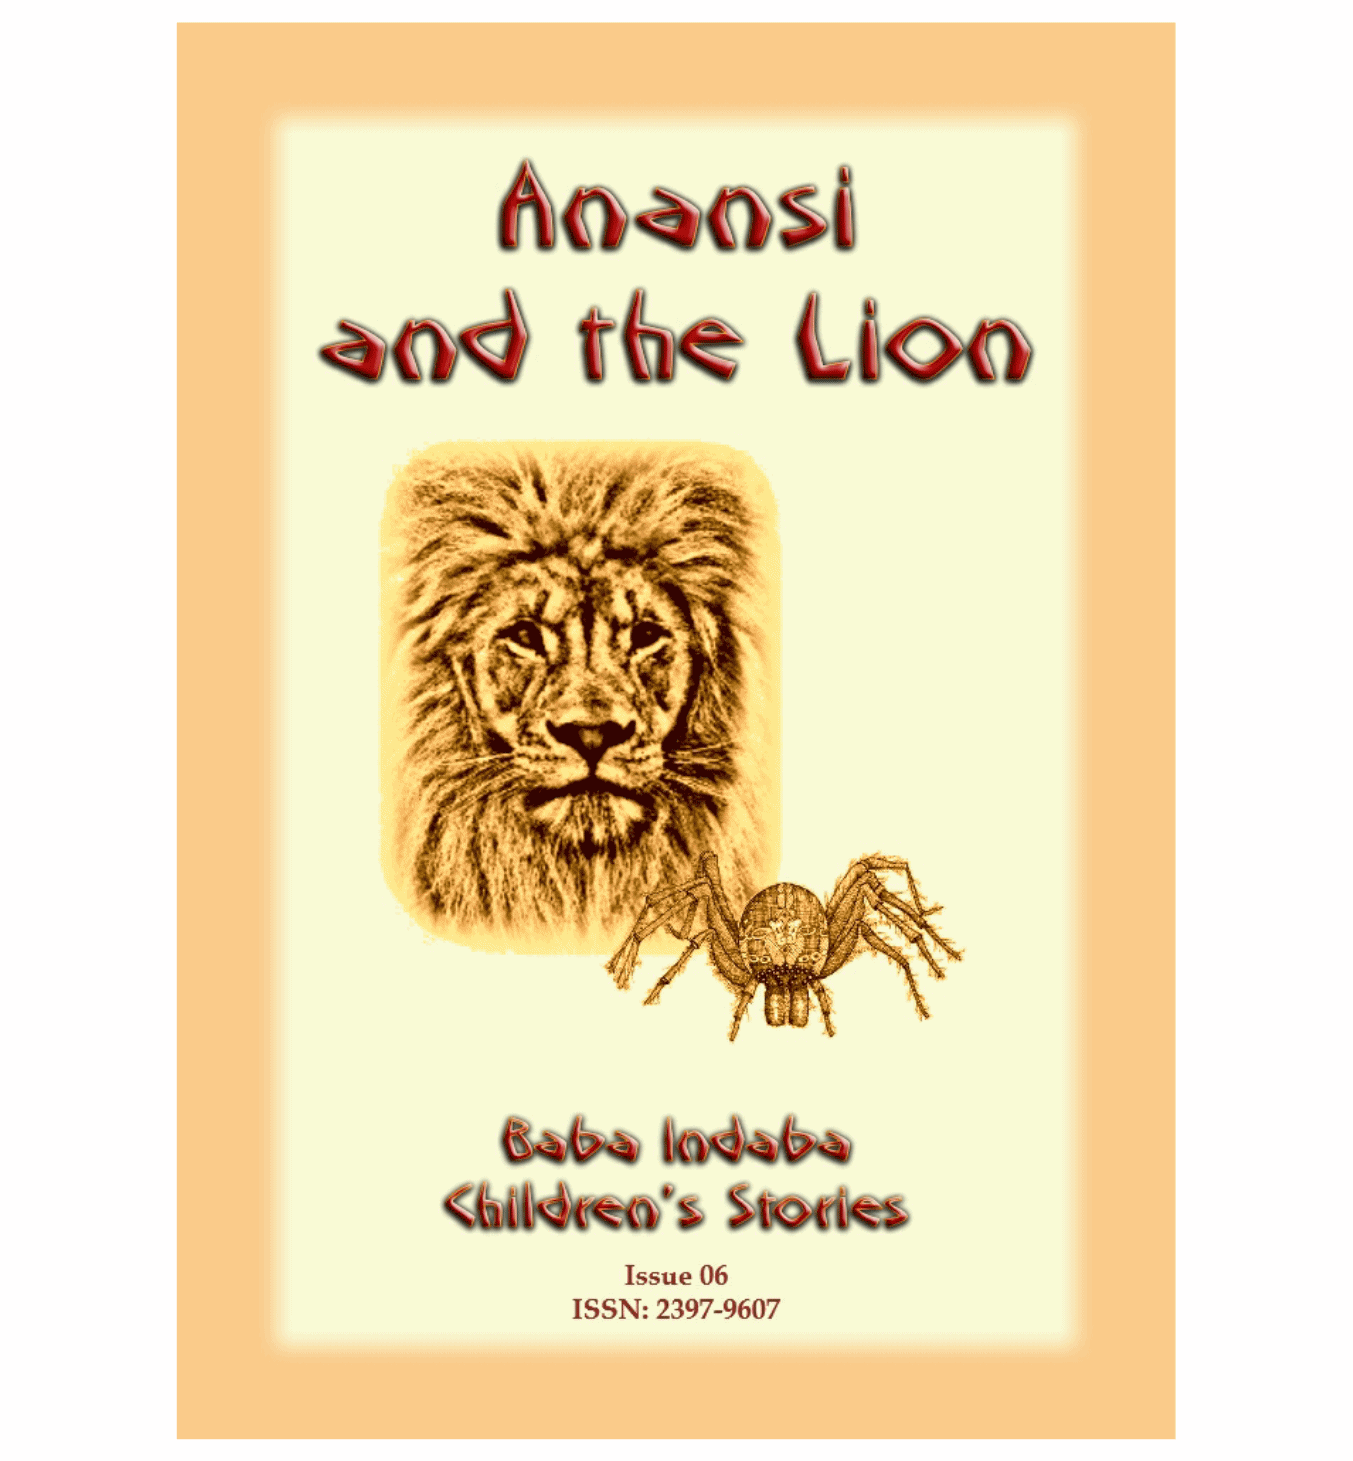 ANANSI AND THE LION - a West African Anansi story: Baba Indaba Children's Stories Issue 06 